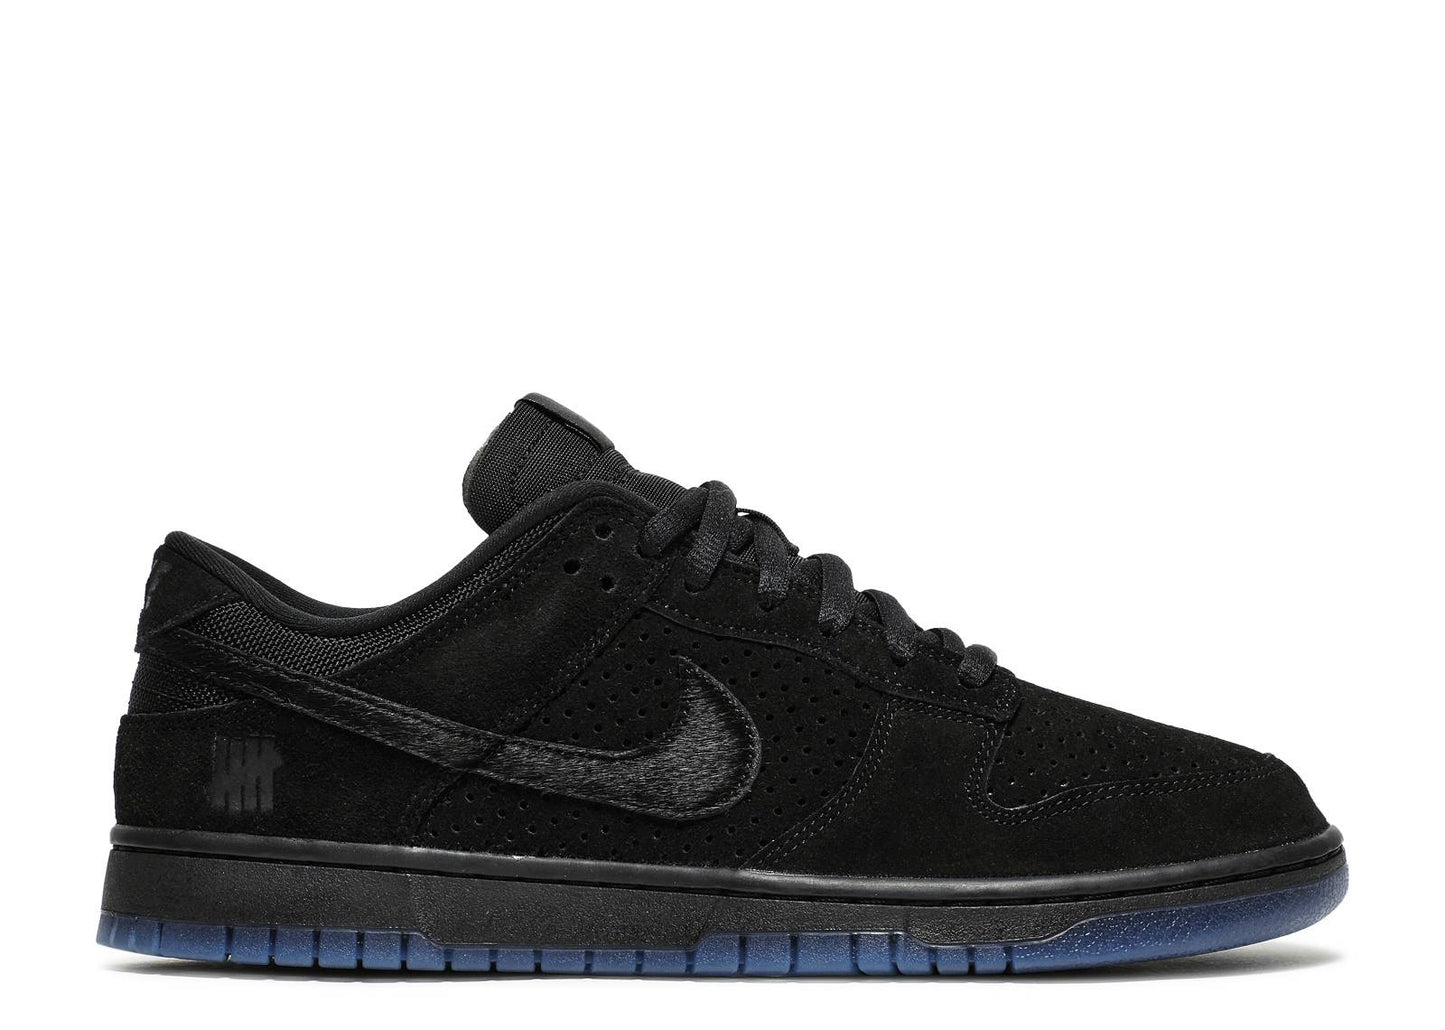 Undefeated x Nike Dunk Low SP "5 On It Black"